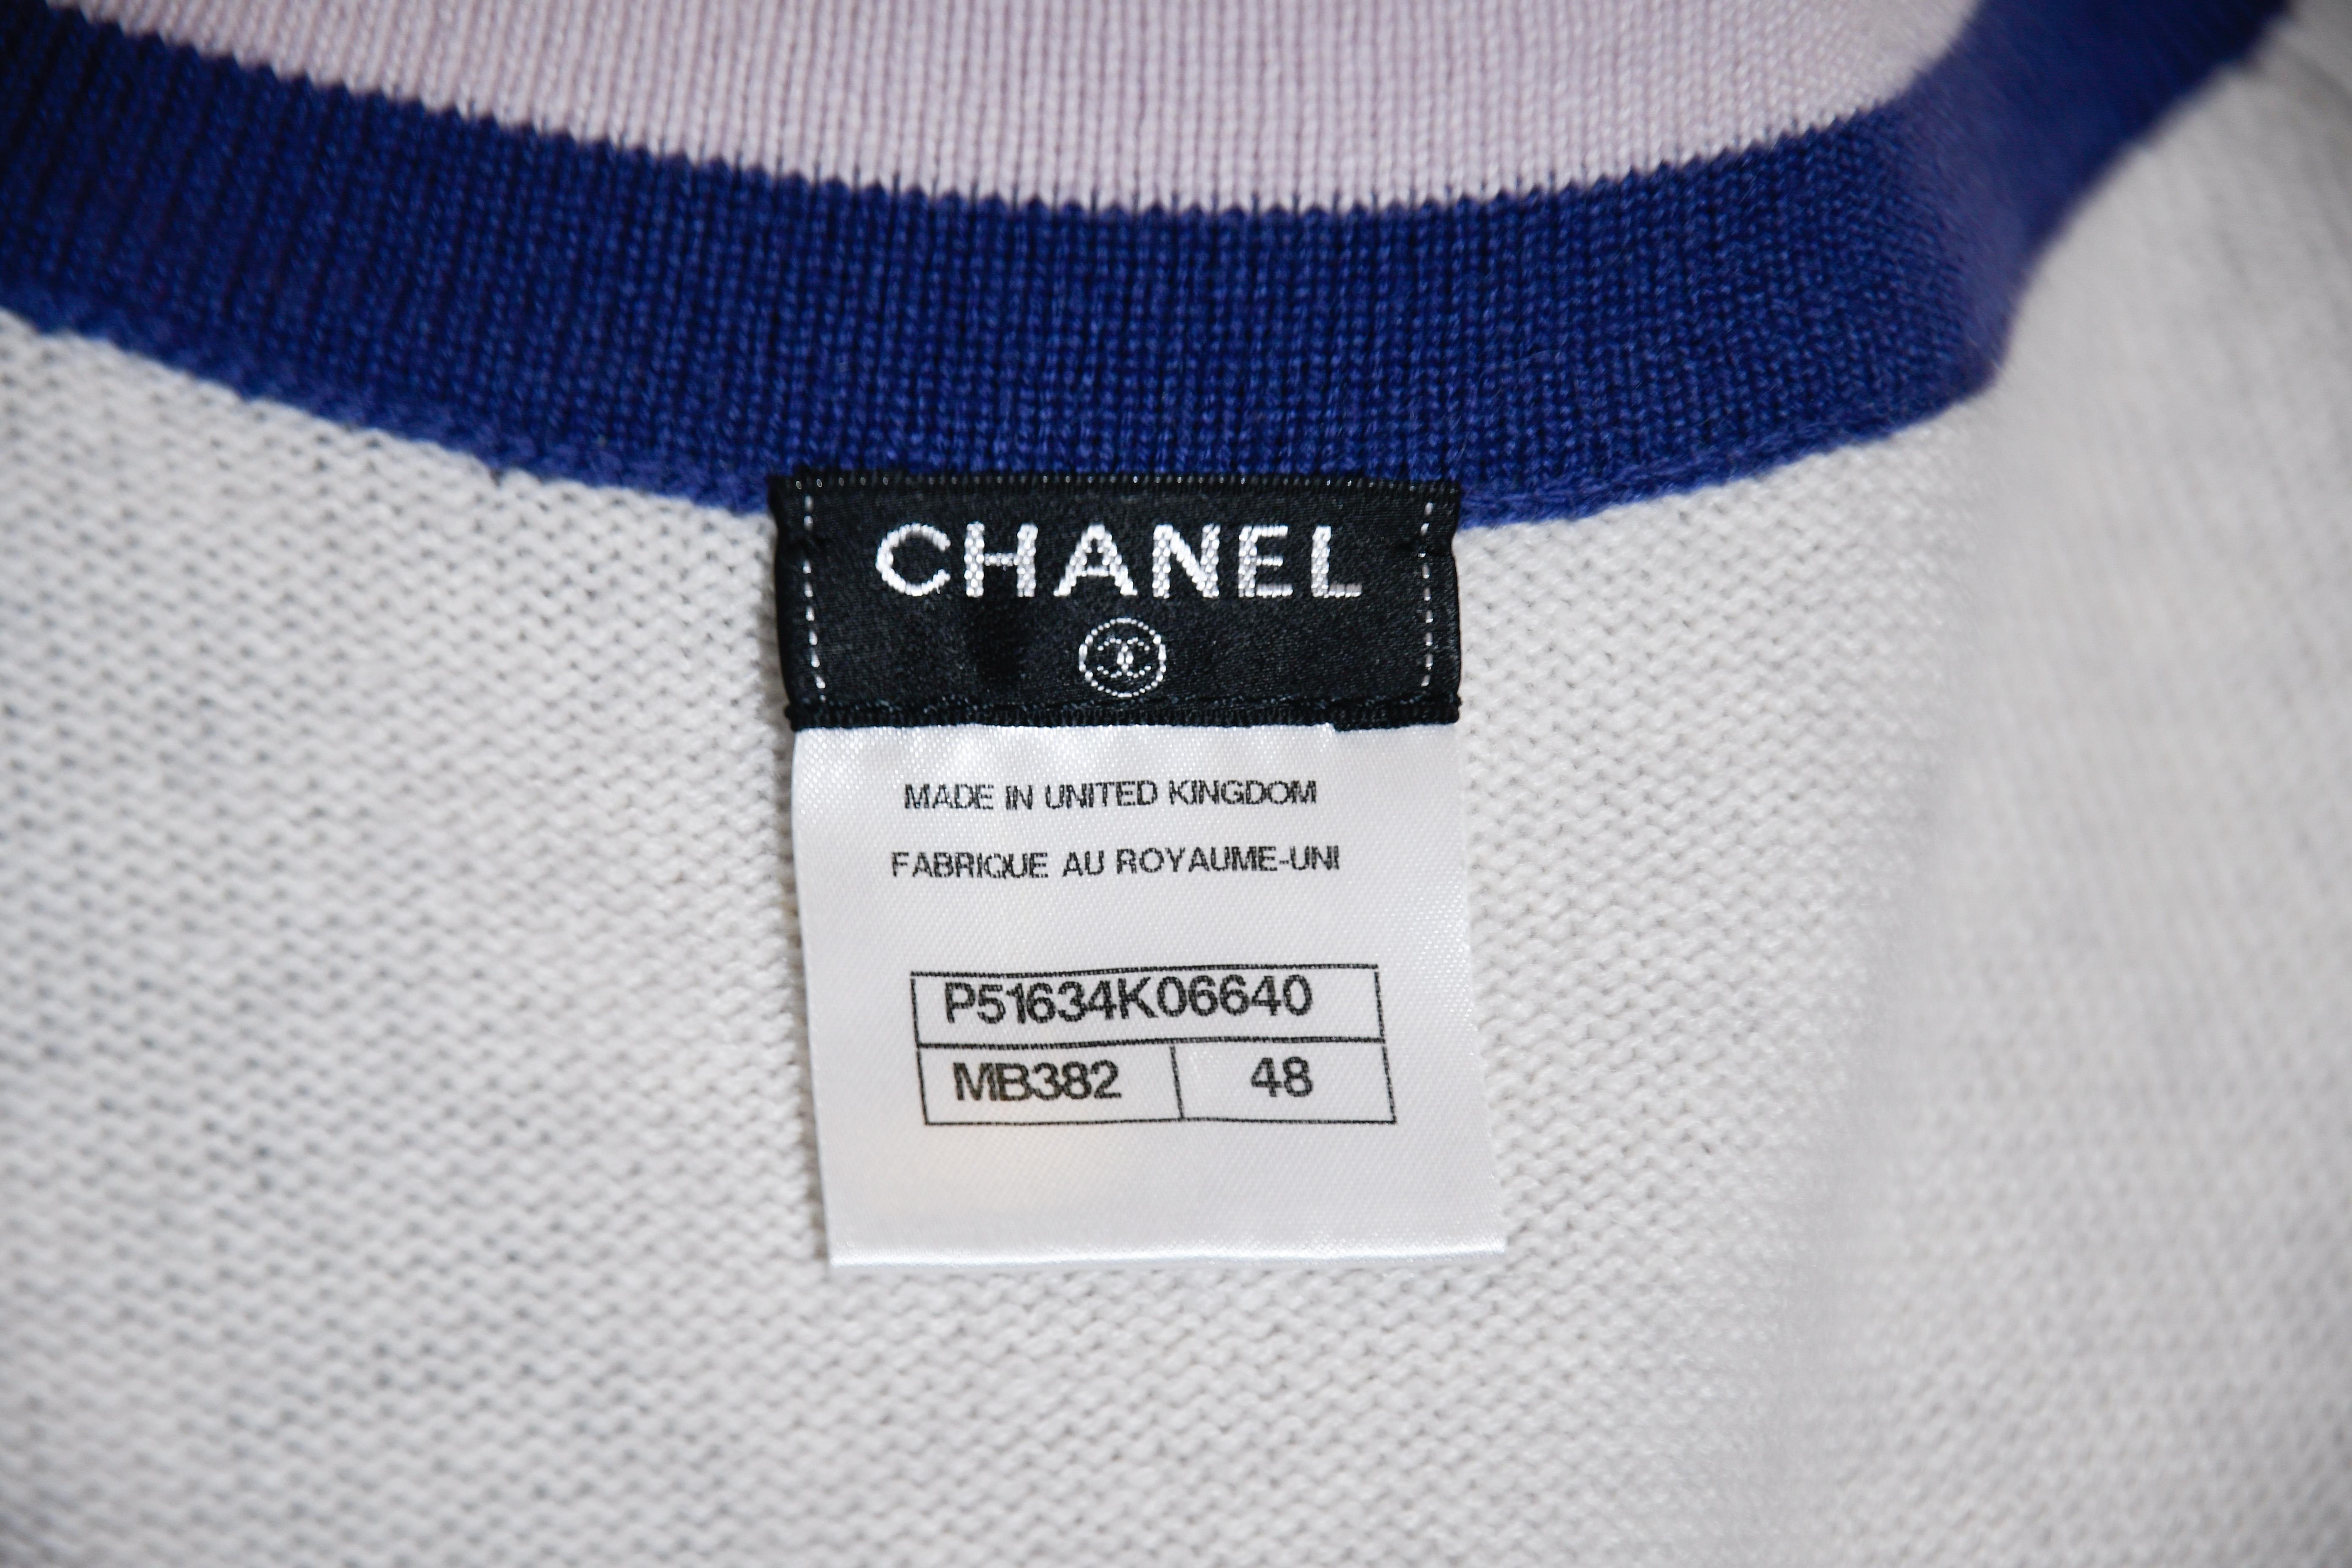 Chanel Lavender Cashmere Dress With Blue Trim & Ivory Long sleeve Cardigan 2